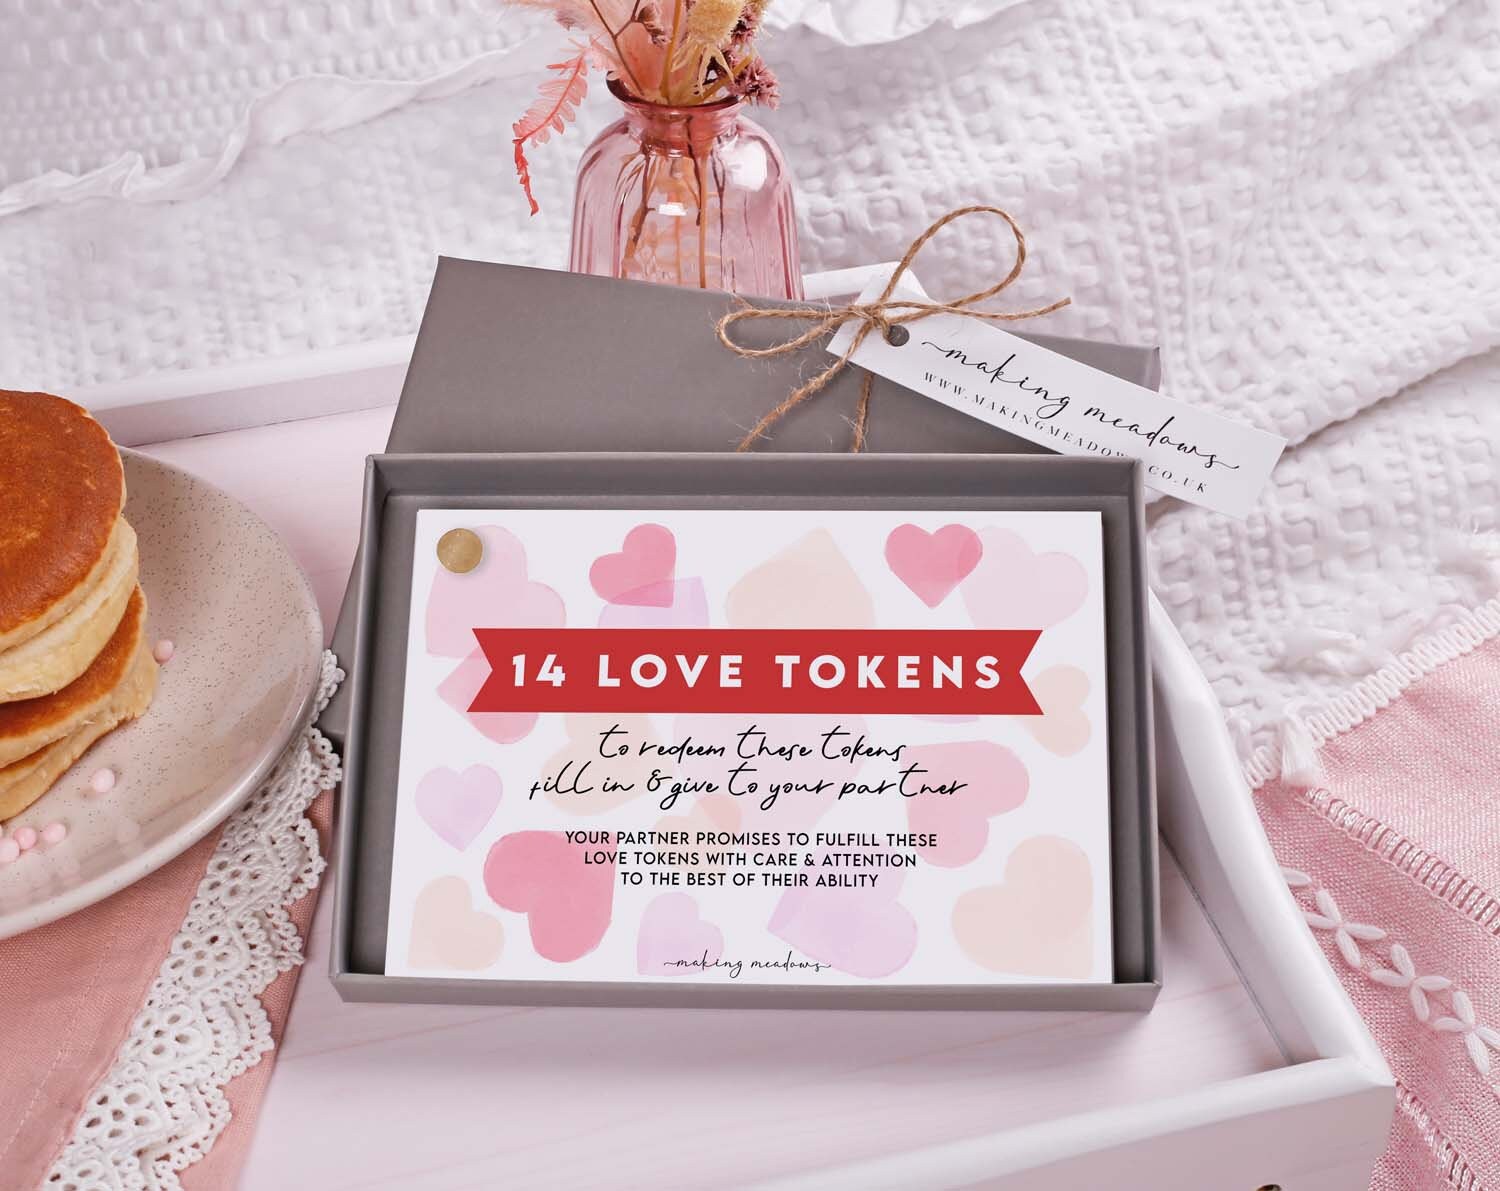 love token cards in a grey gift box for anniversary gift